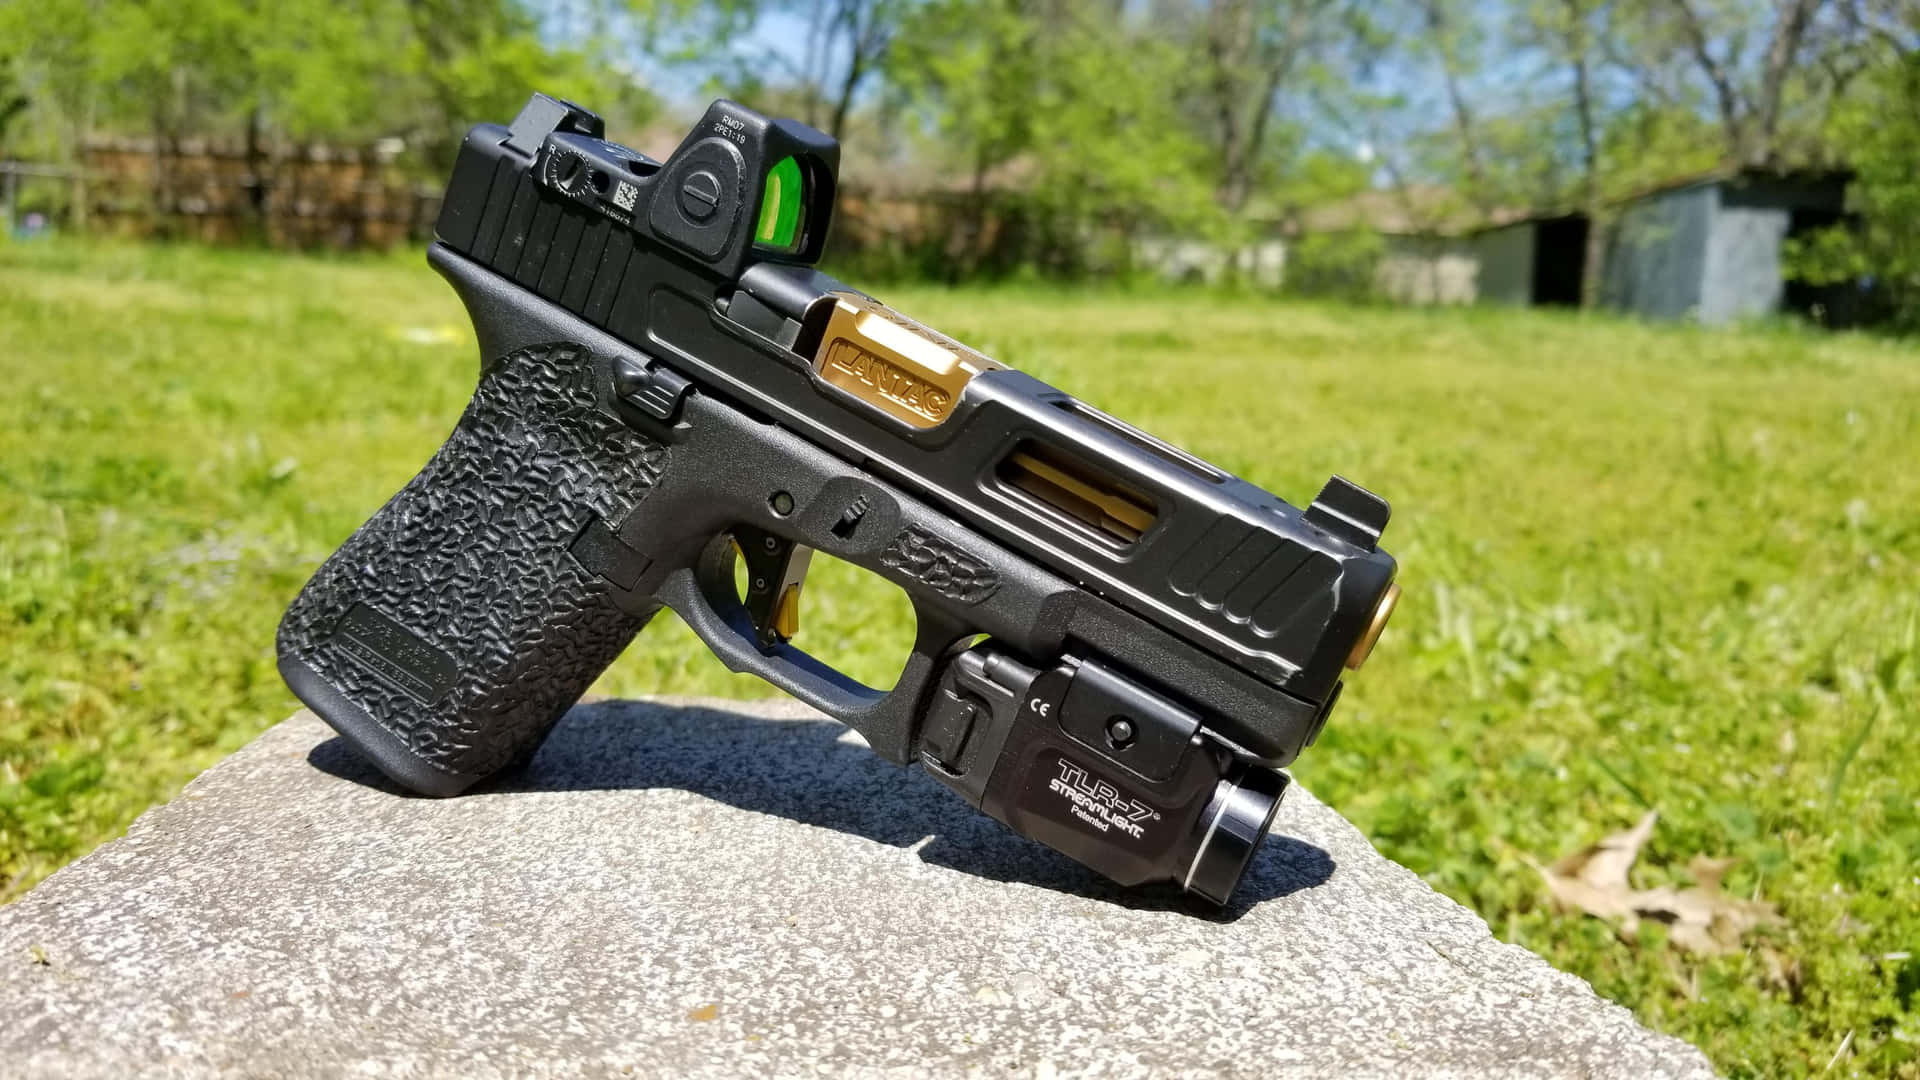 Glock 19 - The Ideal Everyday Carry Pistol